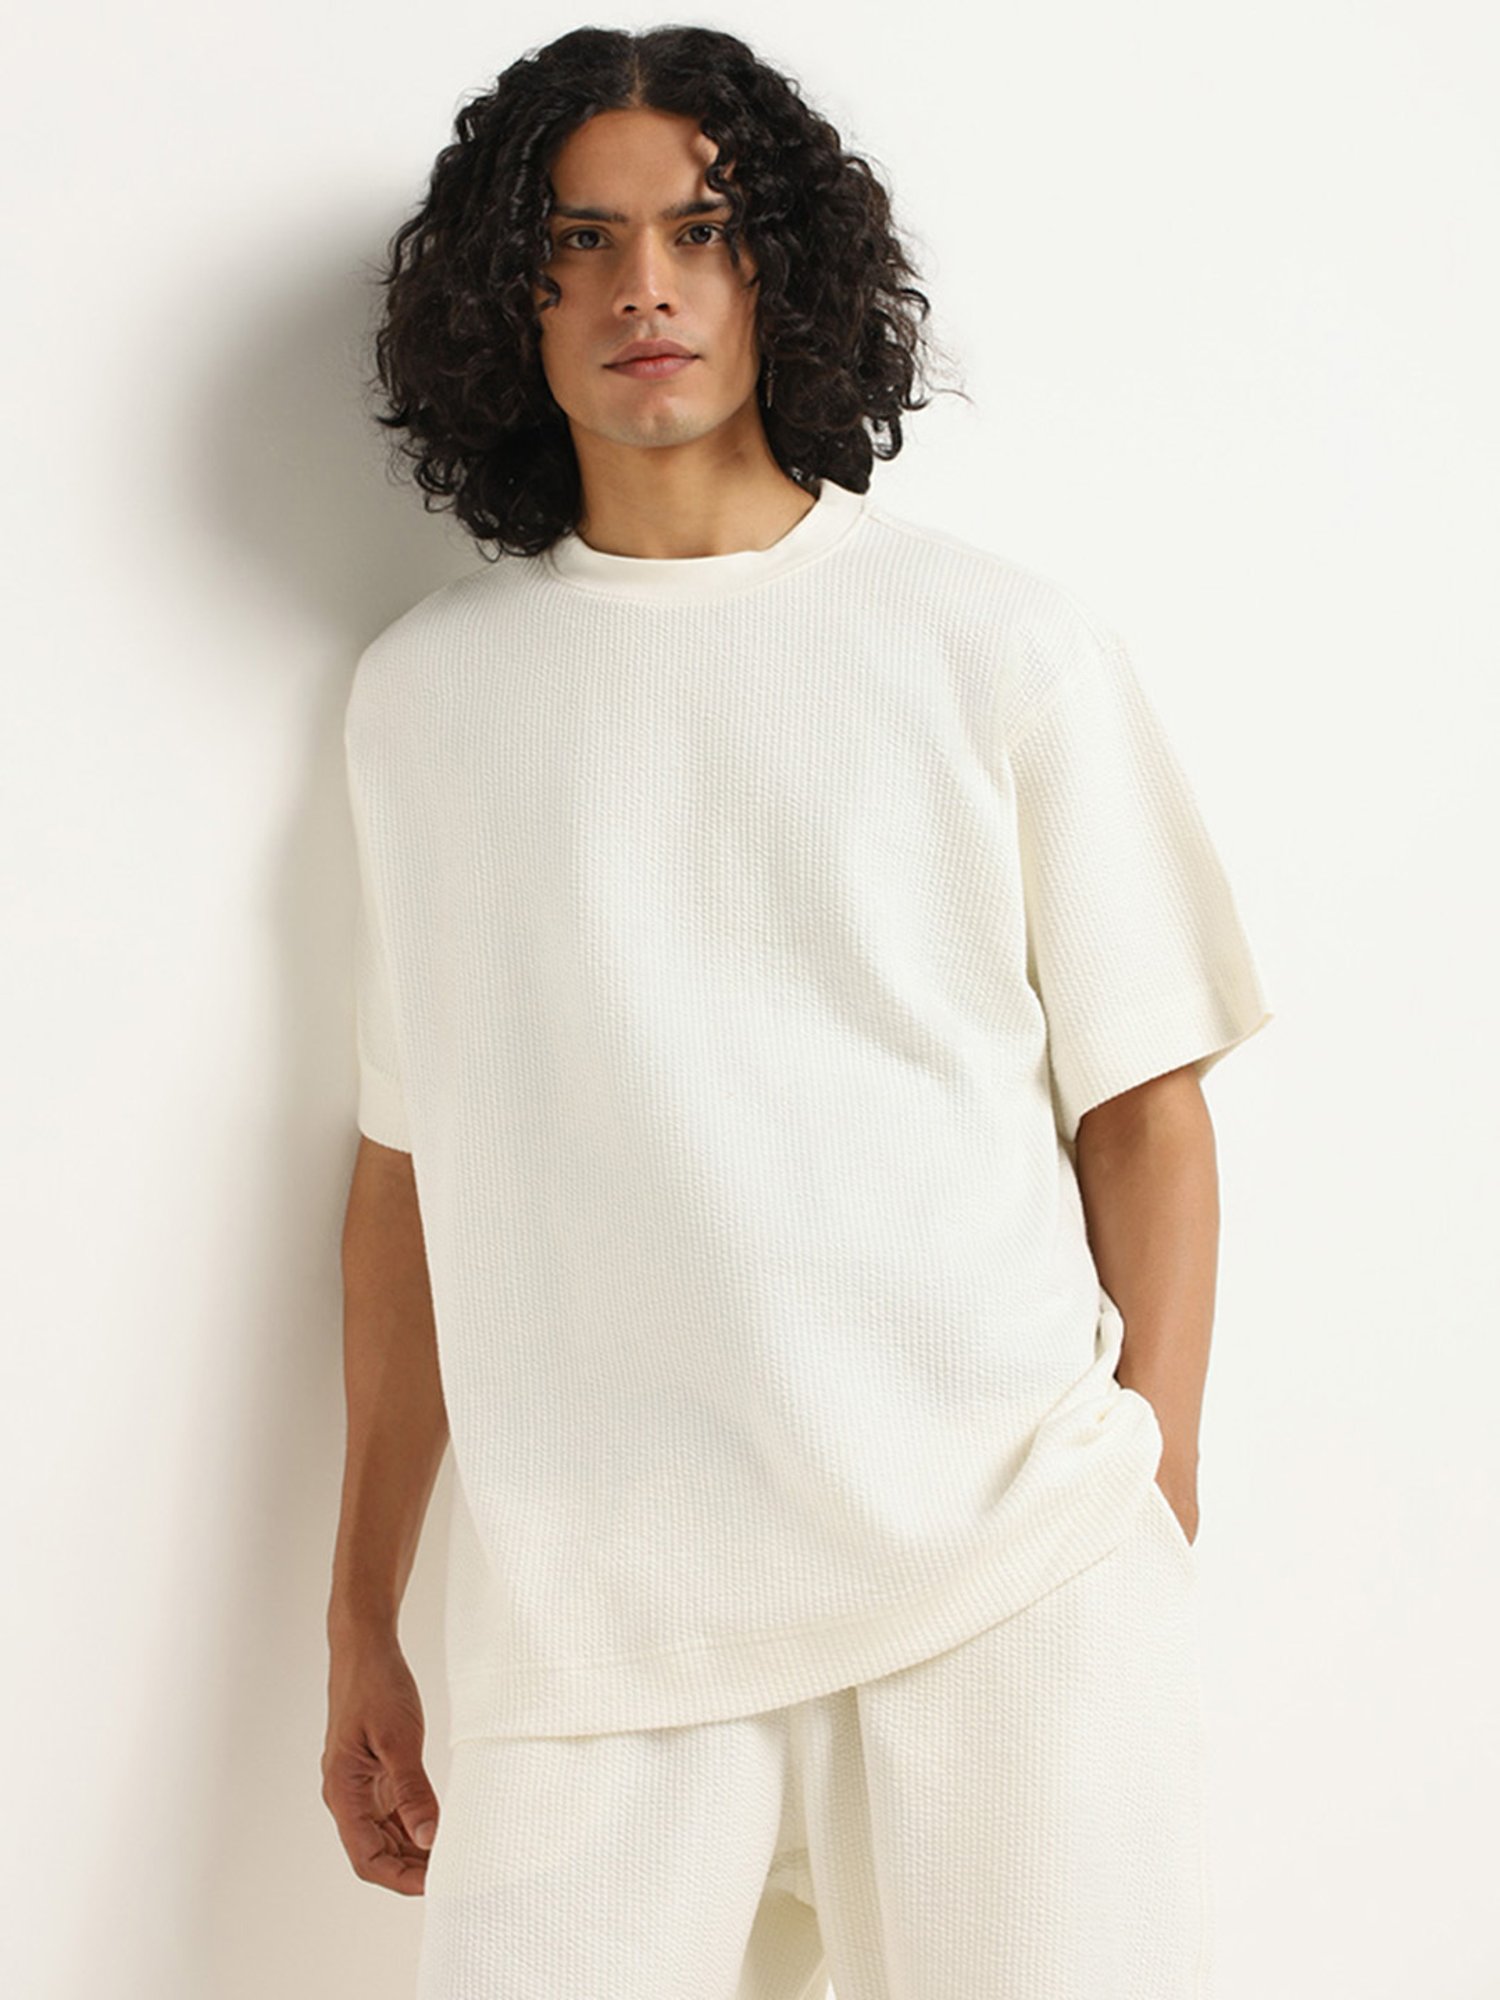 Buy Studiofit by Westside Off-White Textured Relaxed Fit T-Shirt